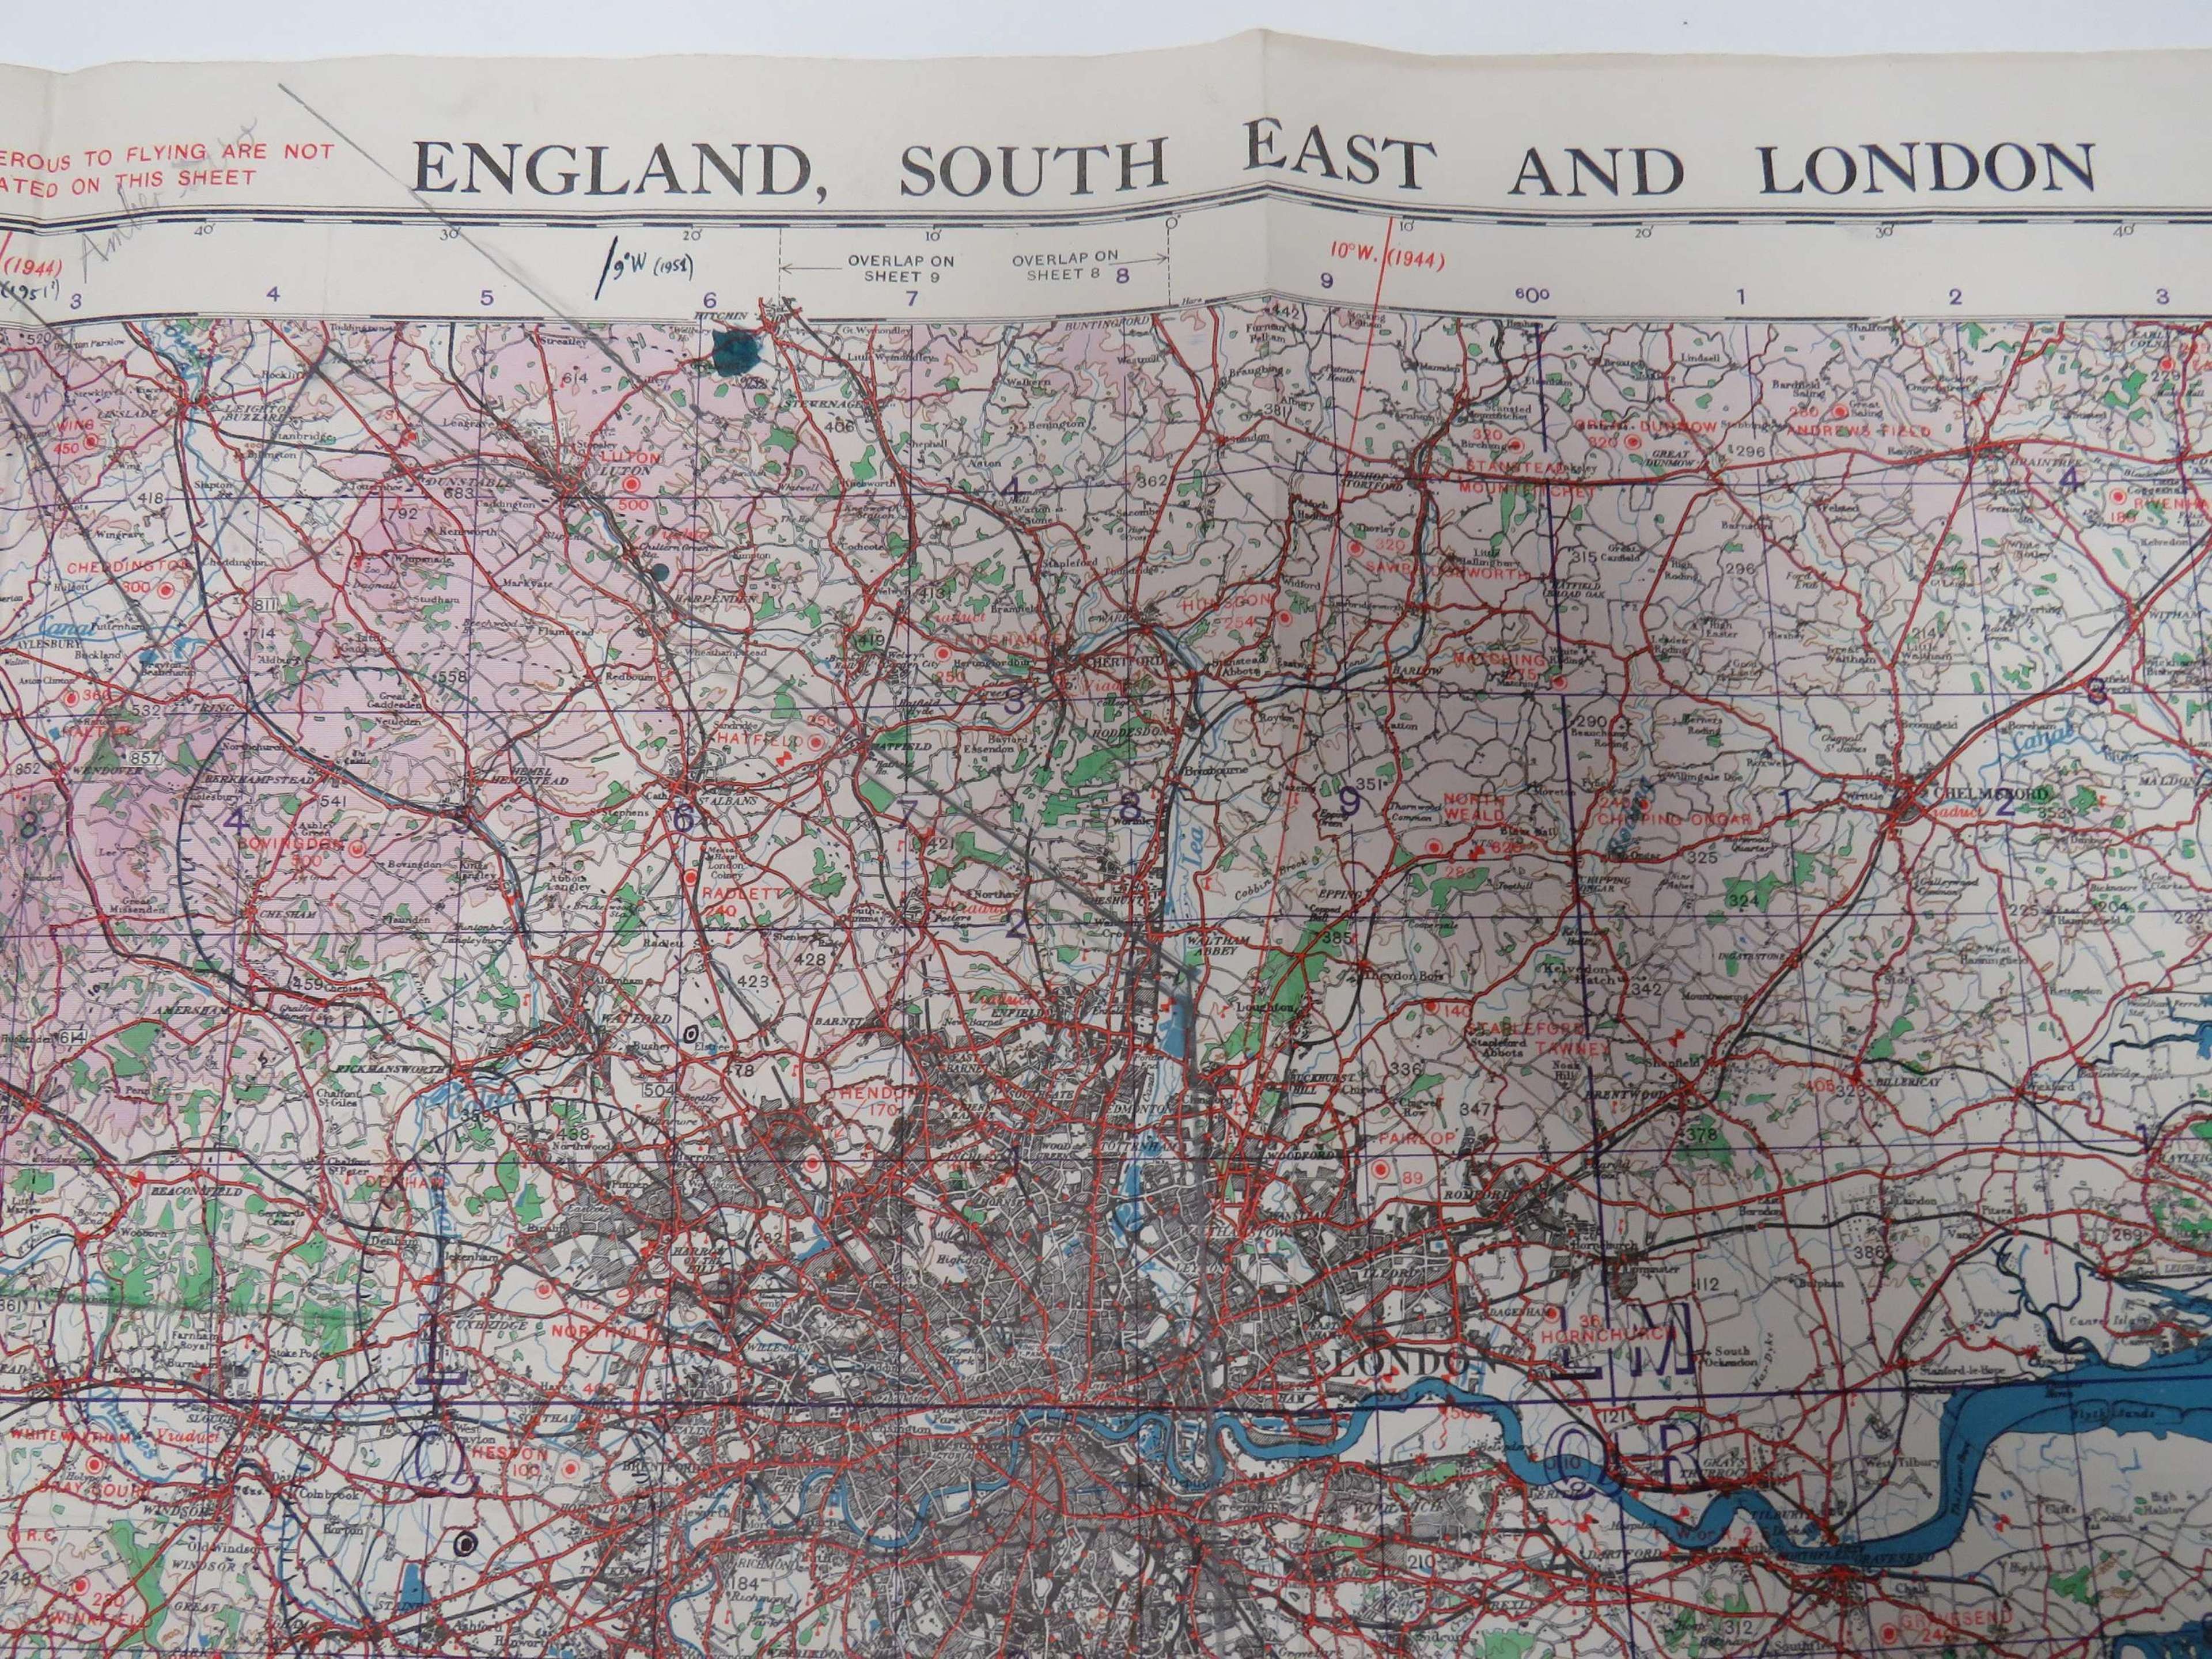 R.A.F Issue England South East and London Map